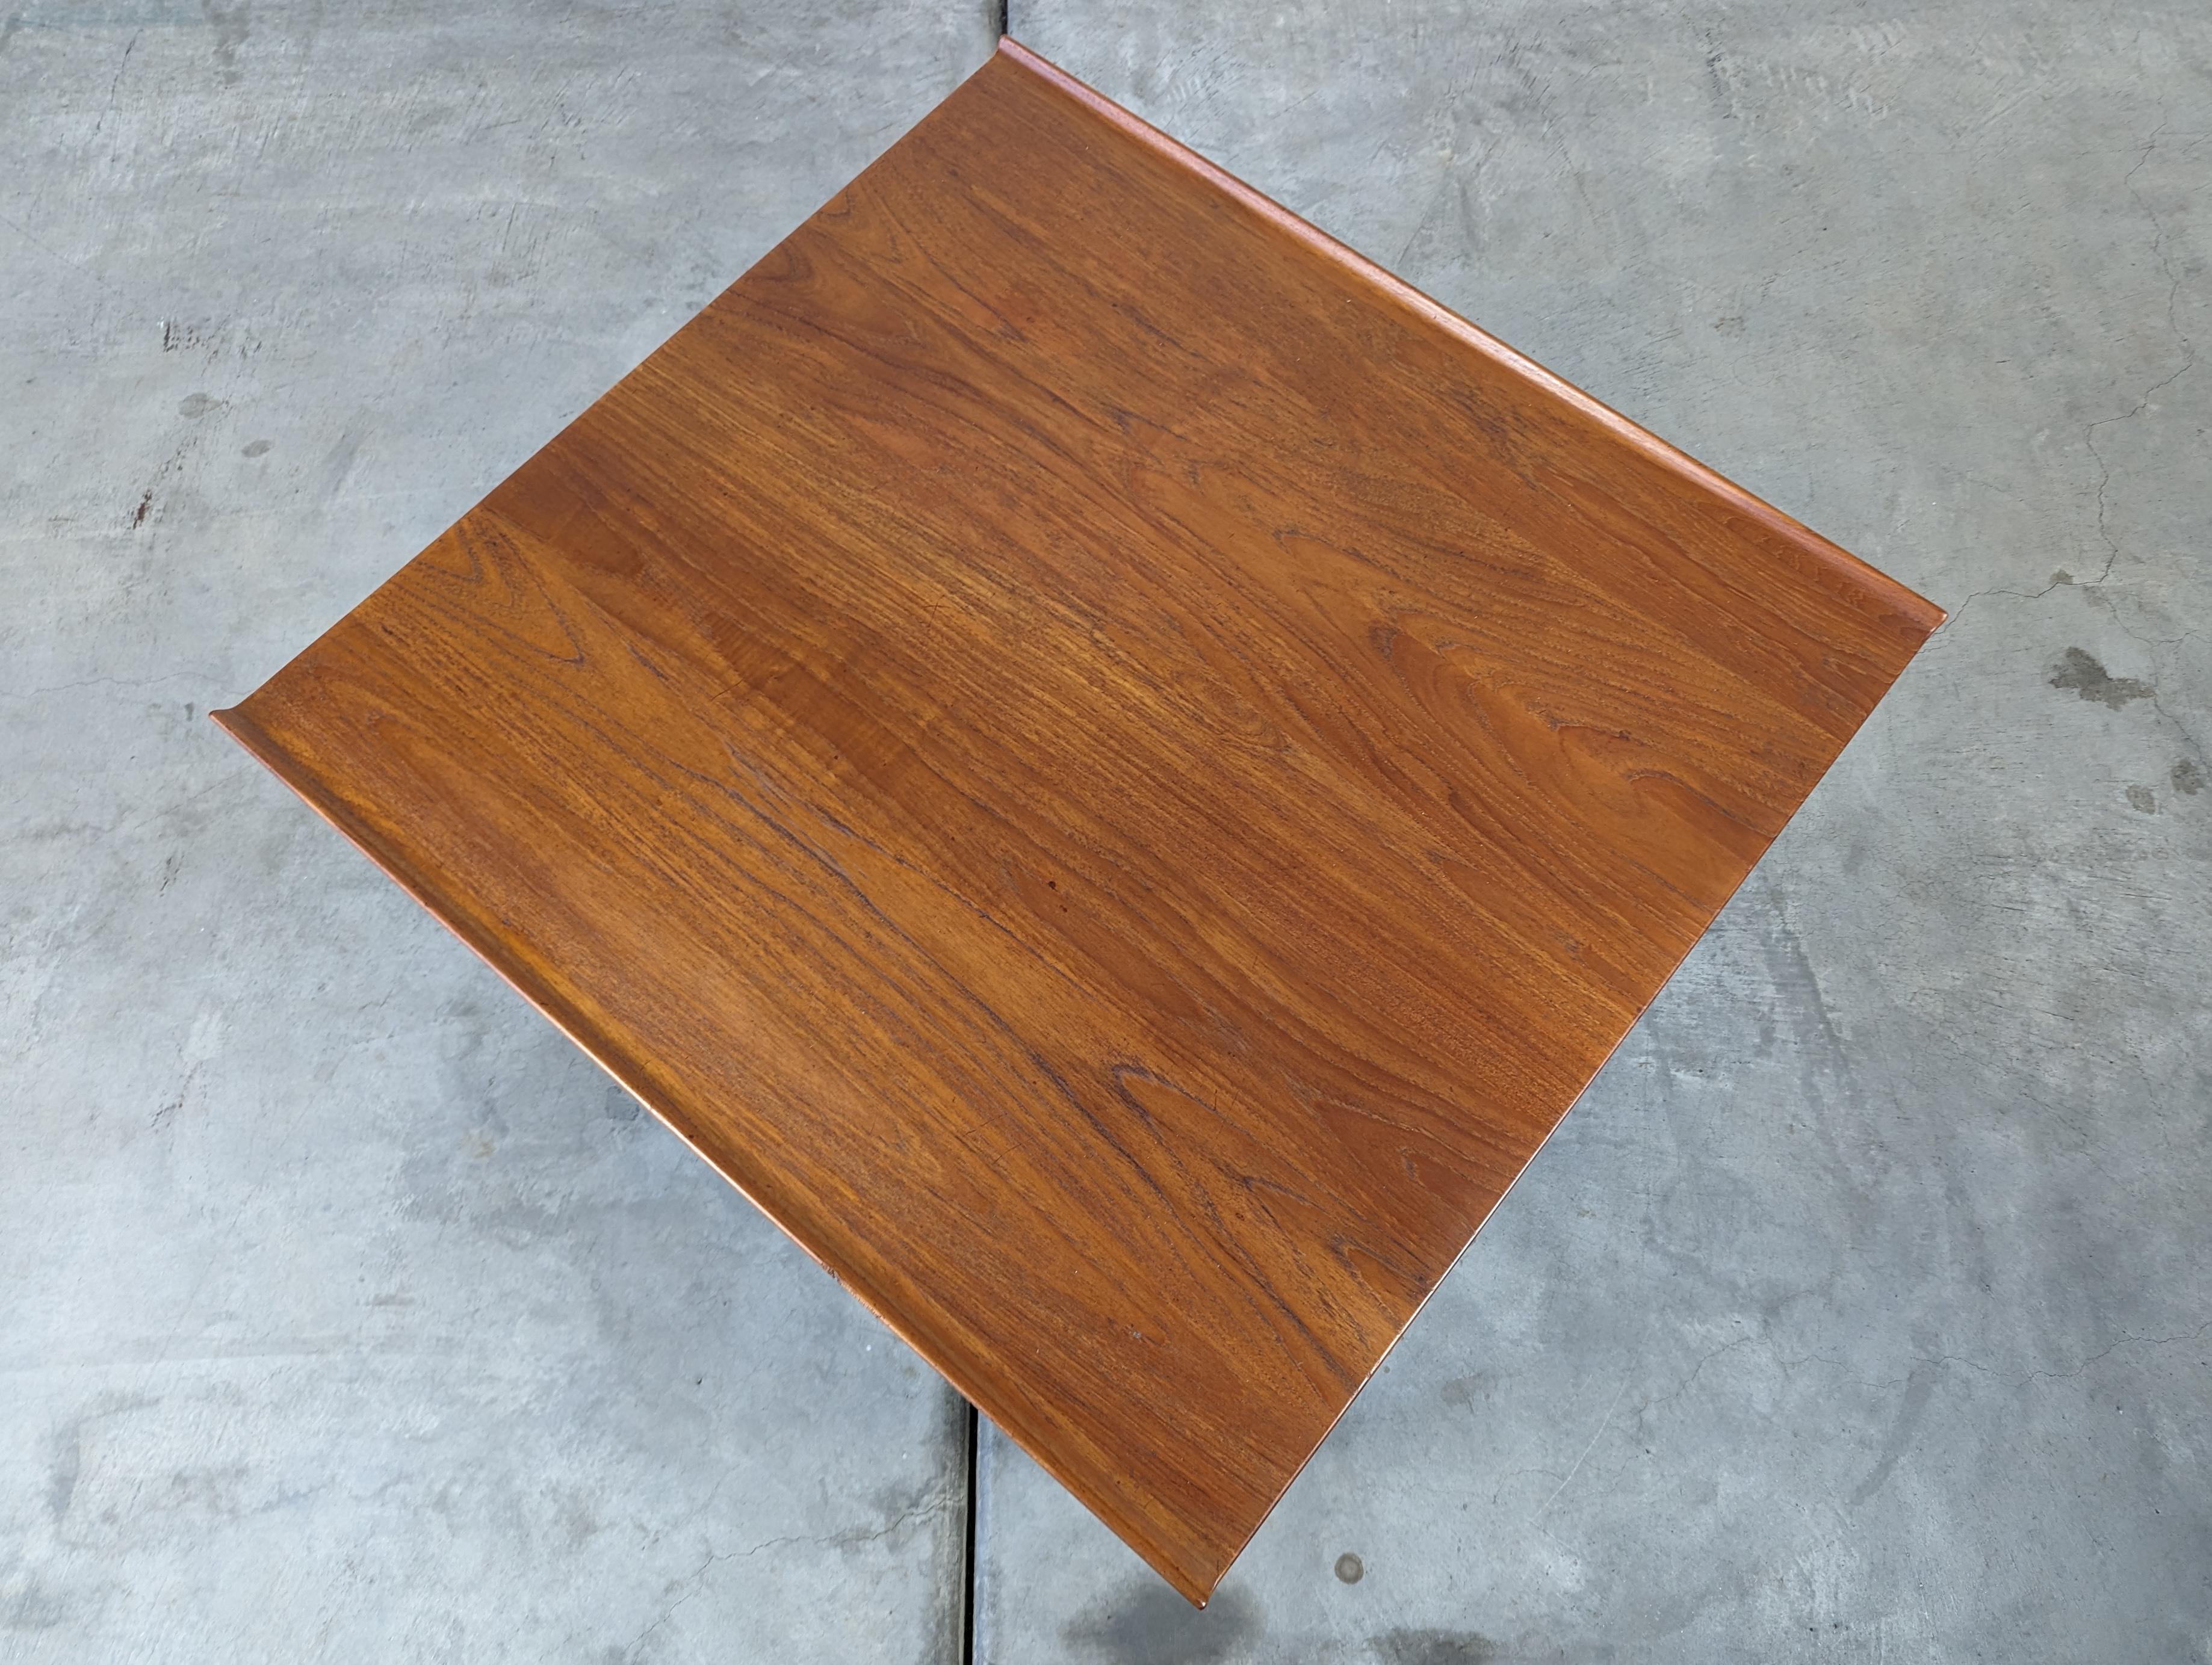 Mid-20th Century Danish Solid Teak Mid Century Coffee Table by Finn Juhl for France & Søn, c1950s For Sale